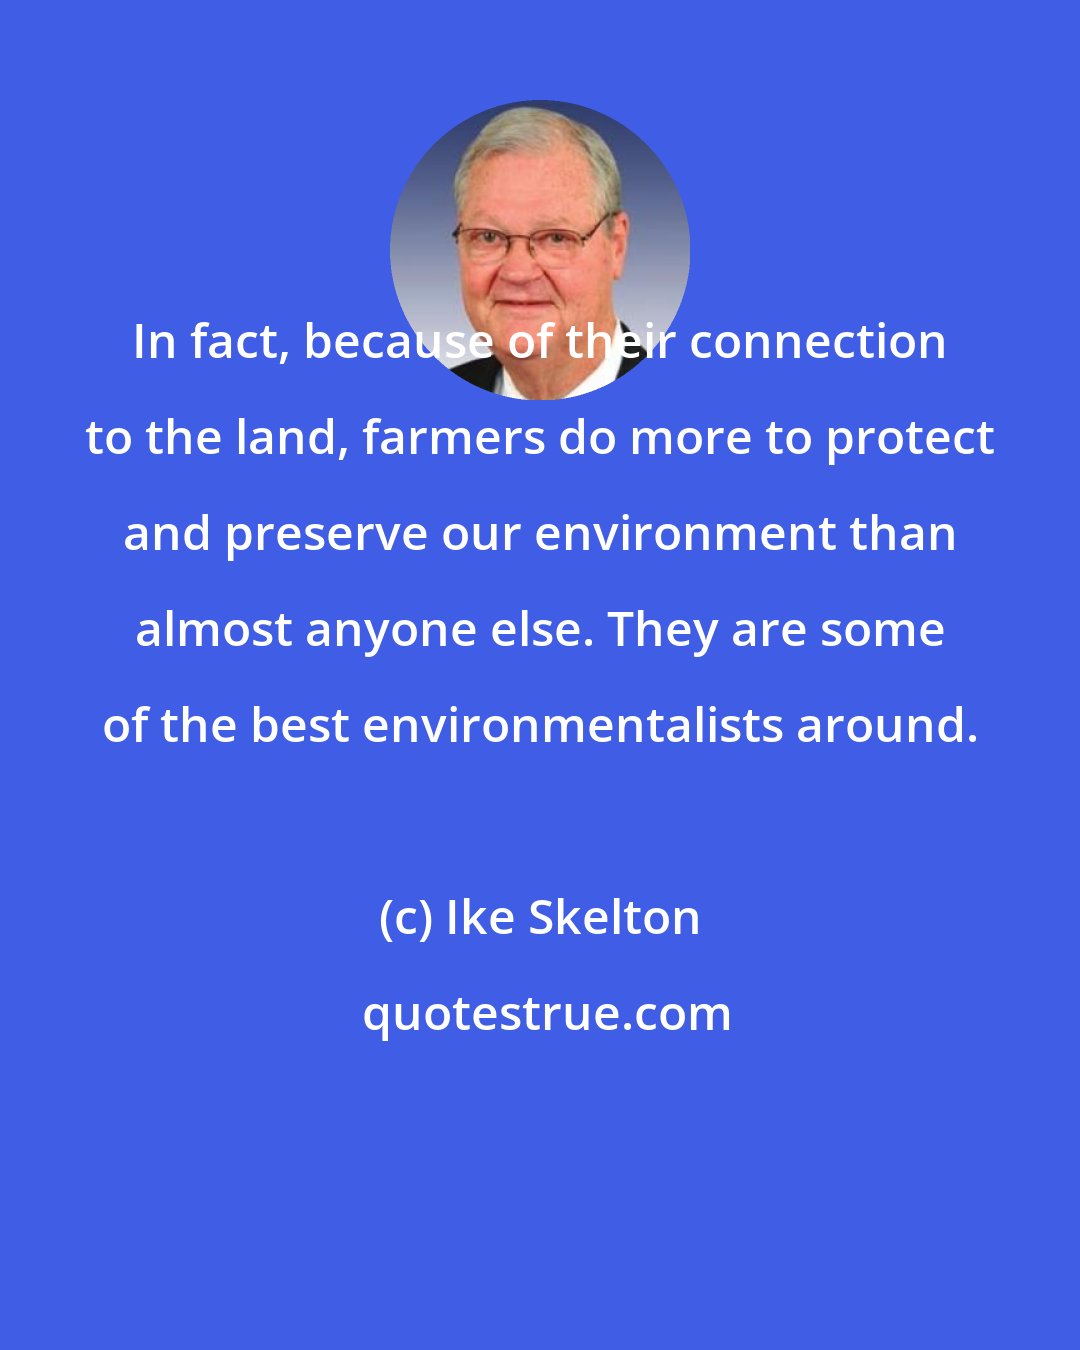 Ike Skelton: In fact, because of their connection to the land, farmers do more to protect and preserve our environment than almost anyone else. They are some of the best environmentalists around.